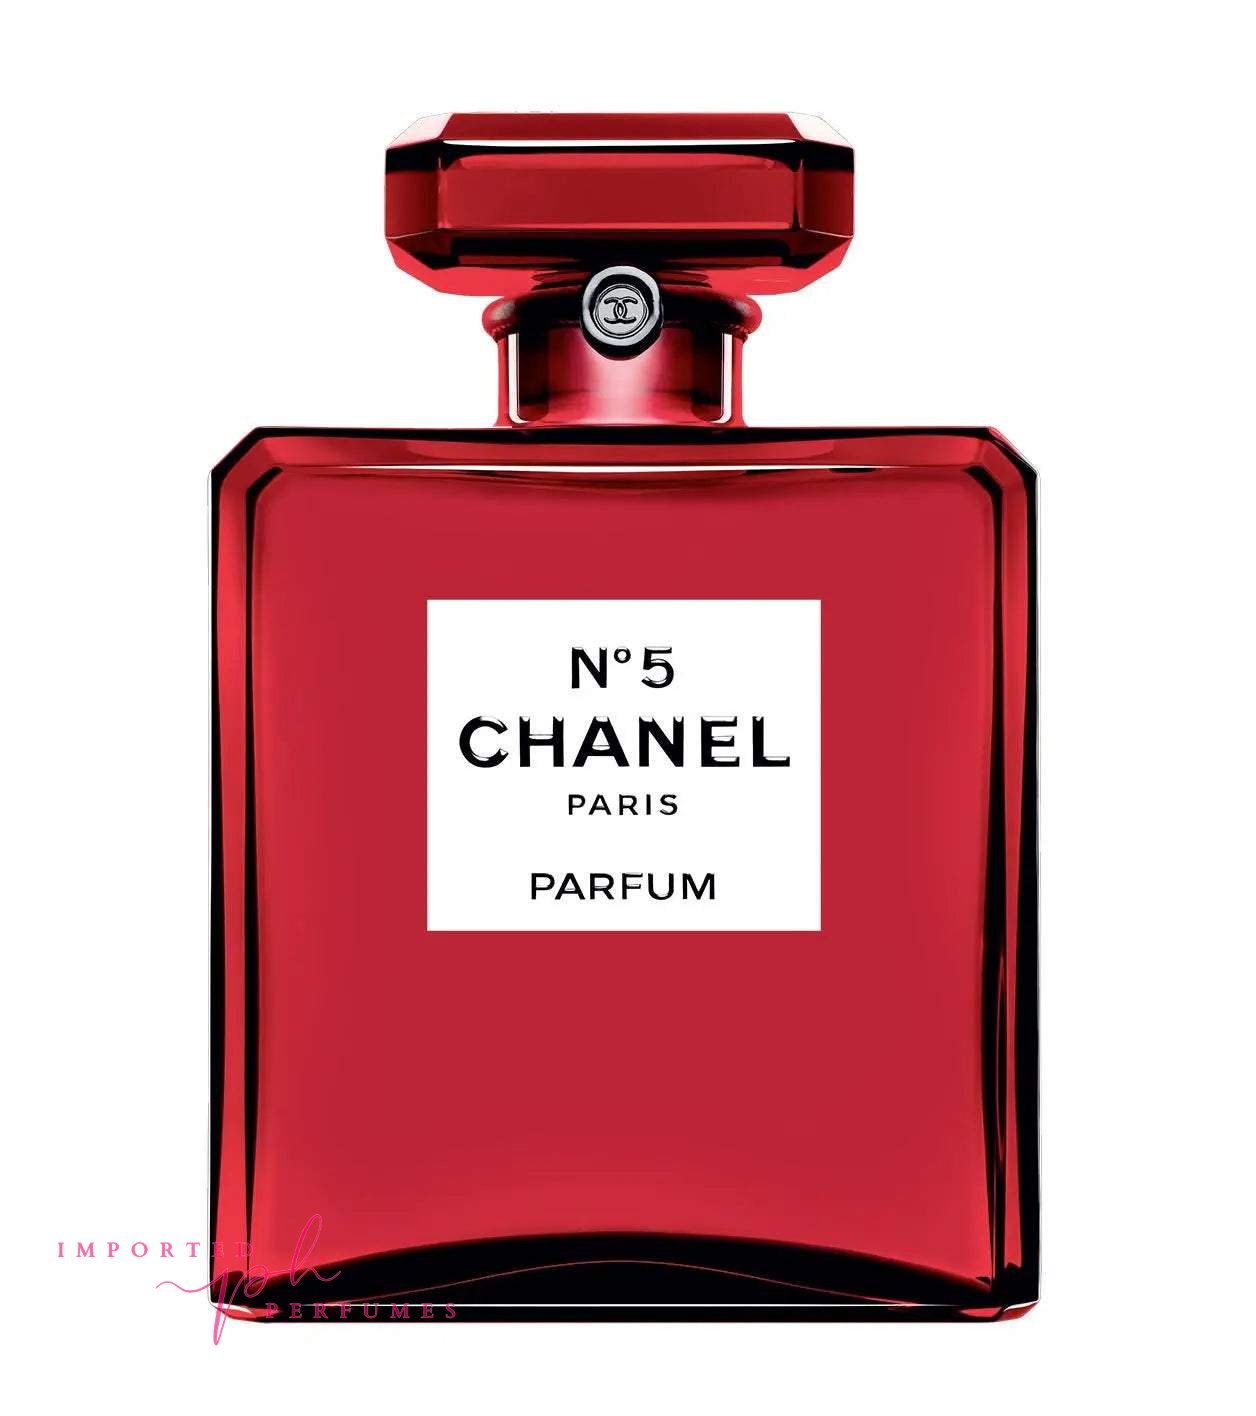 Chanel No 5 L'Eau Red Edition Chanel For Women 100ml-Imported Perfumes Co-chanel,for women,women